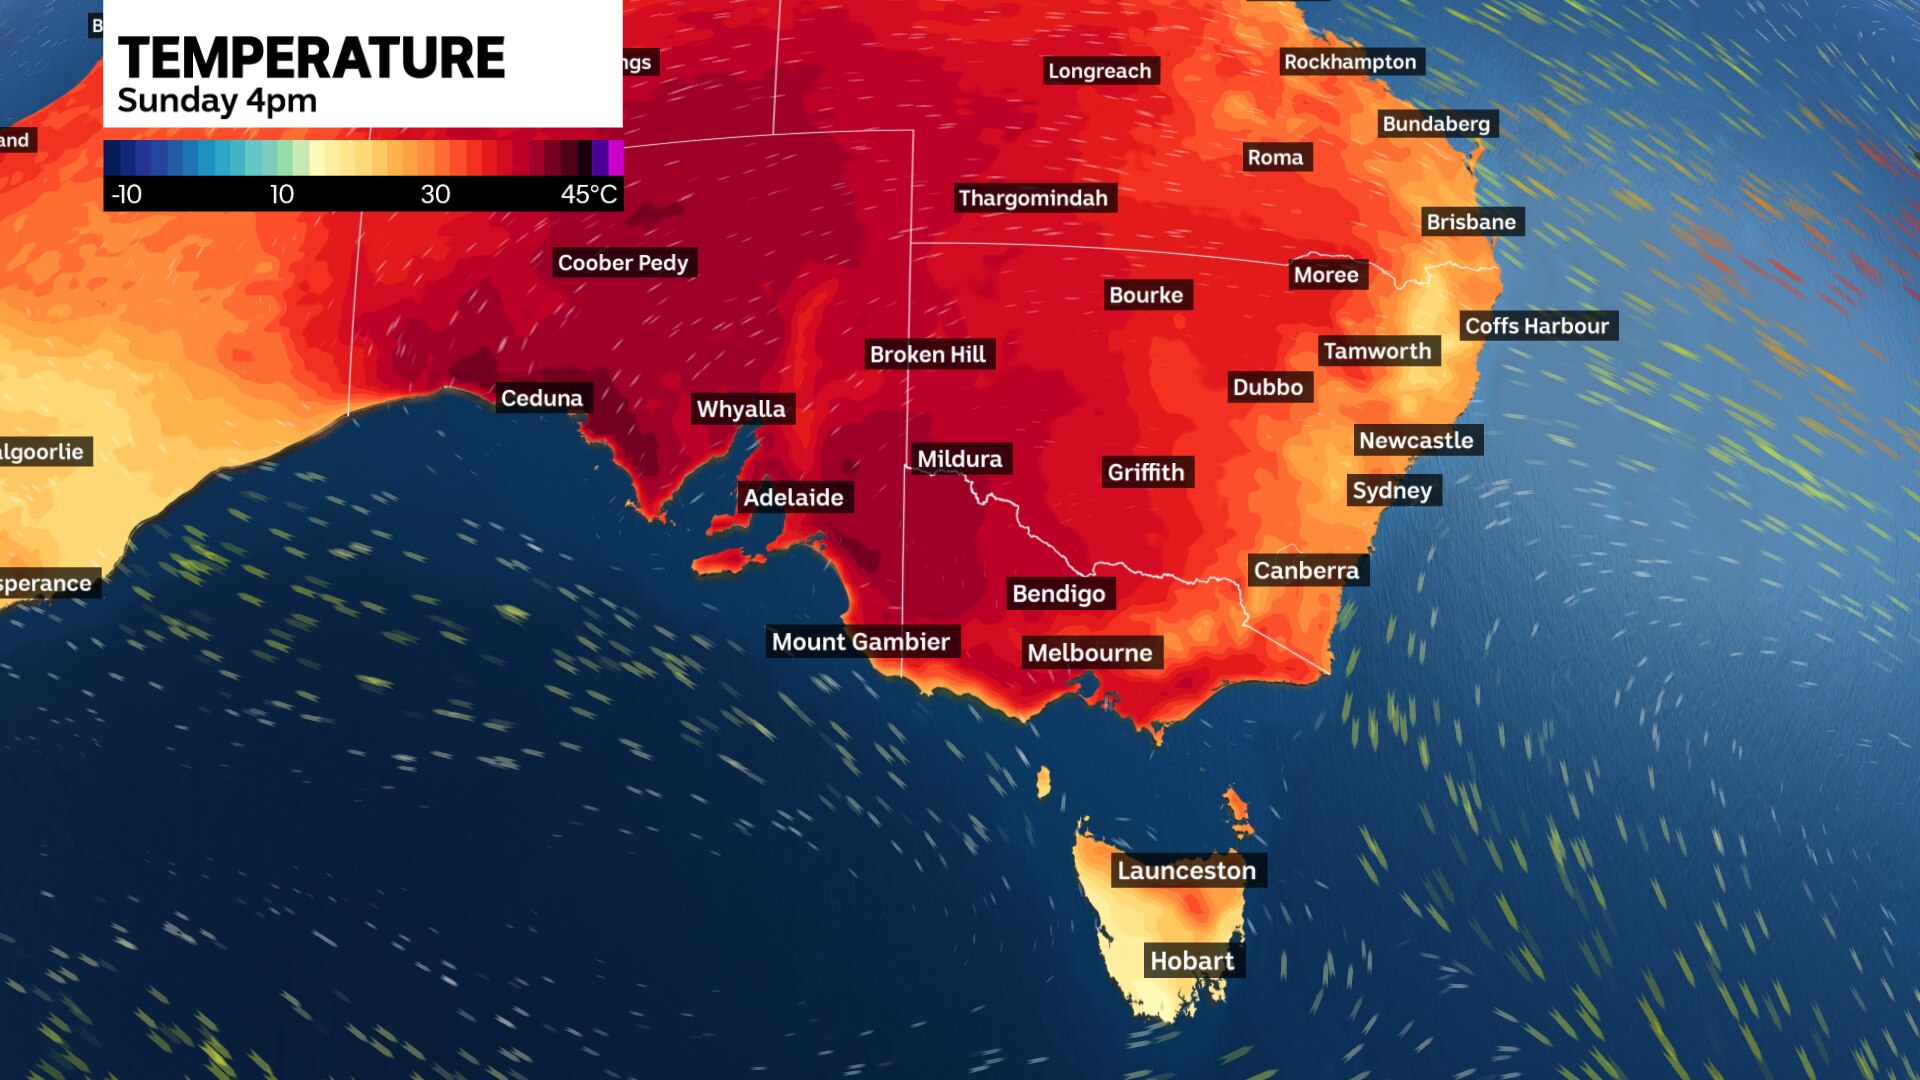 weather map shows how Sunday afternoon will reach around 40C